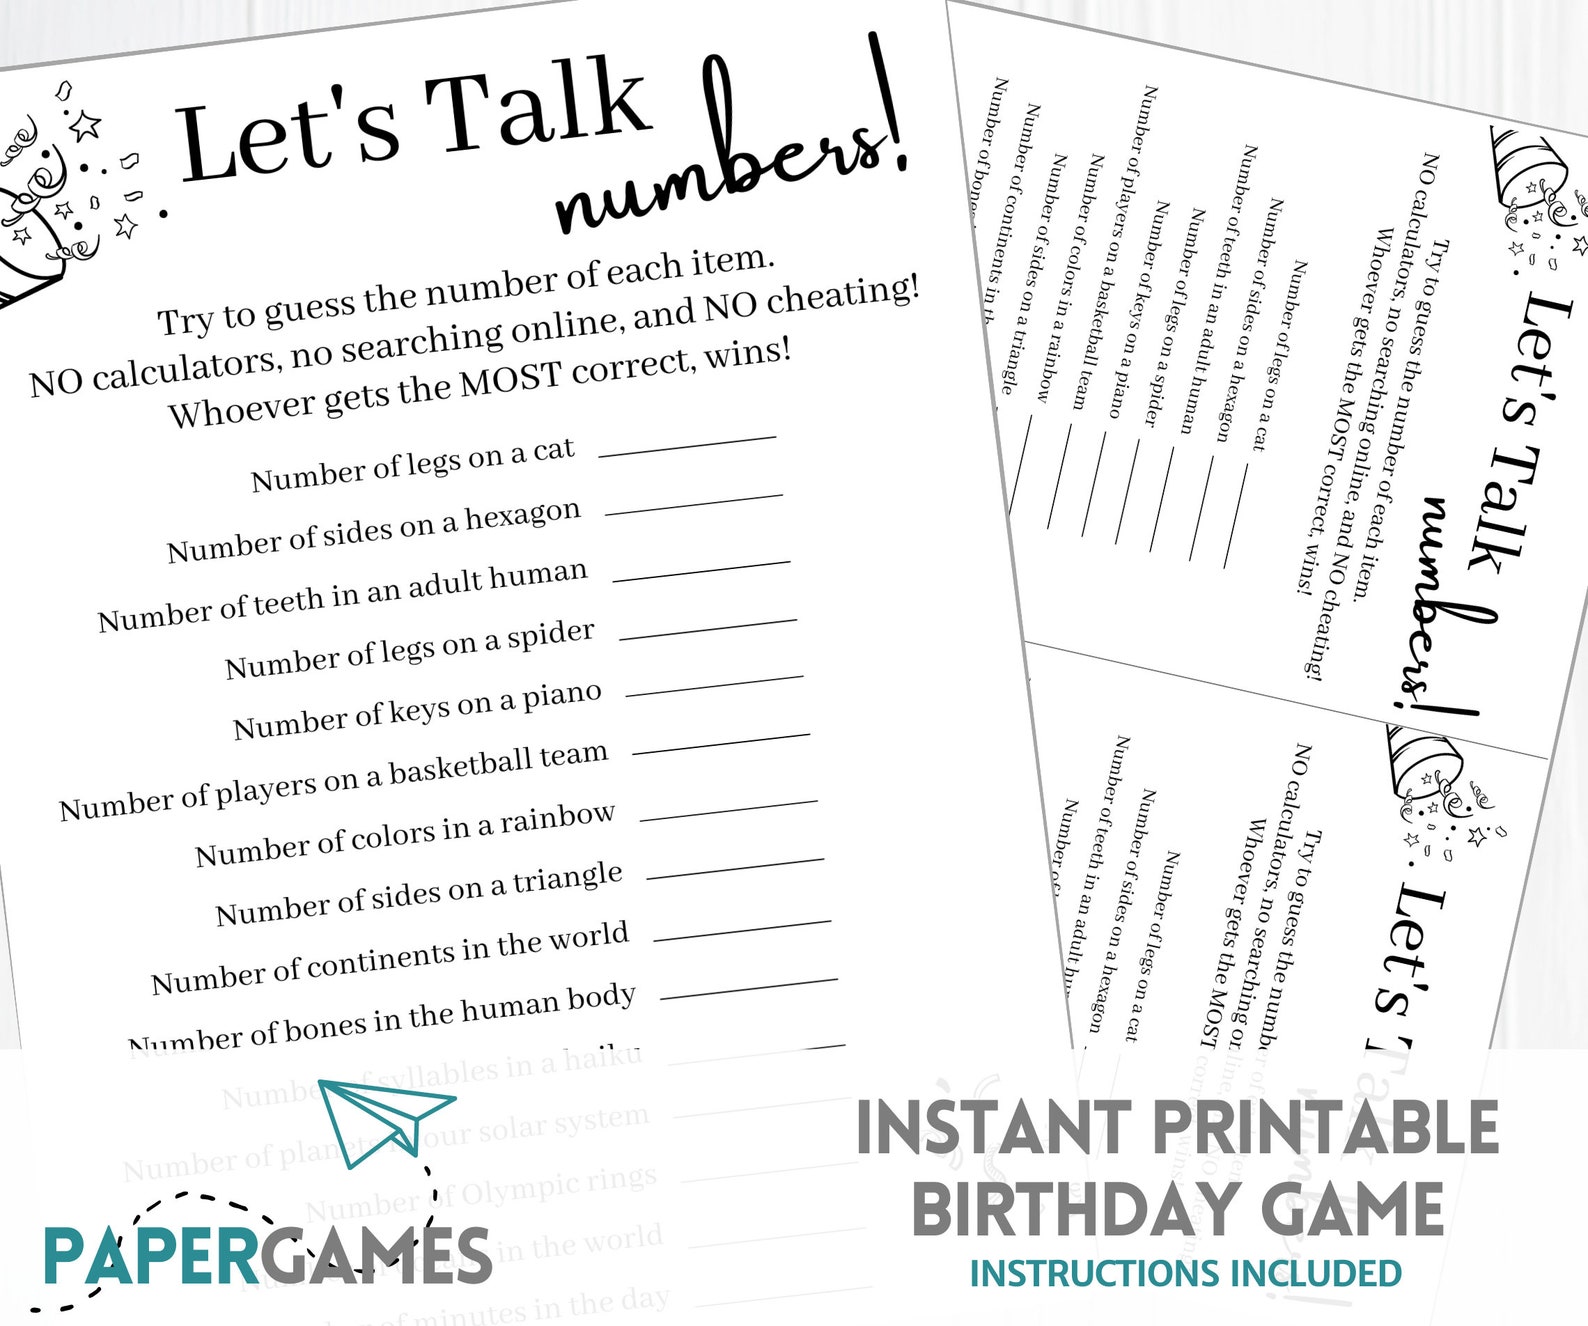 Hilarious Adult Birthday Game Printable Party Games, Adult Games ...